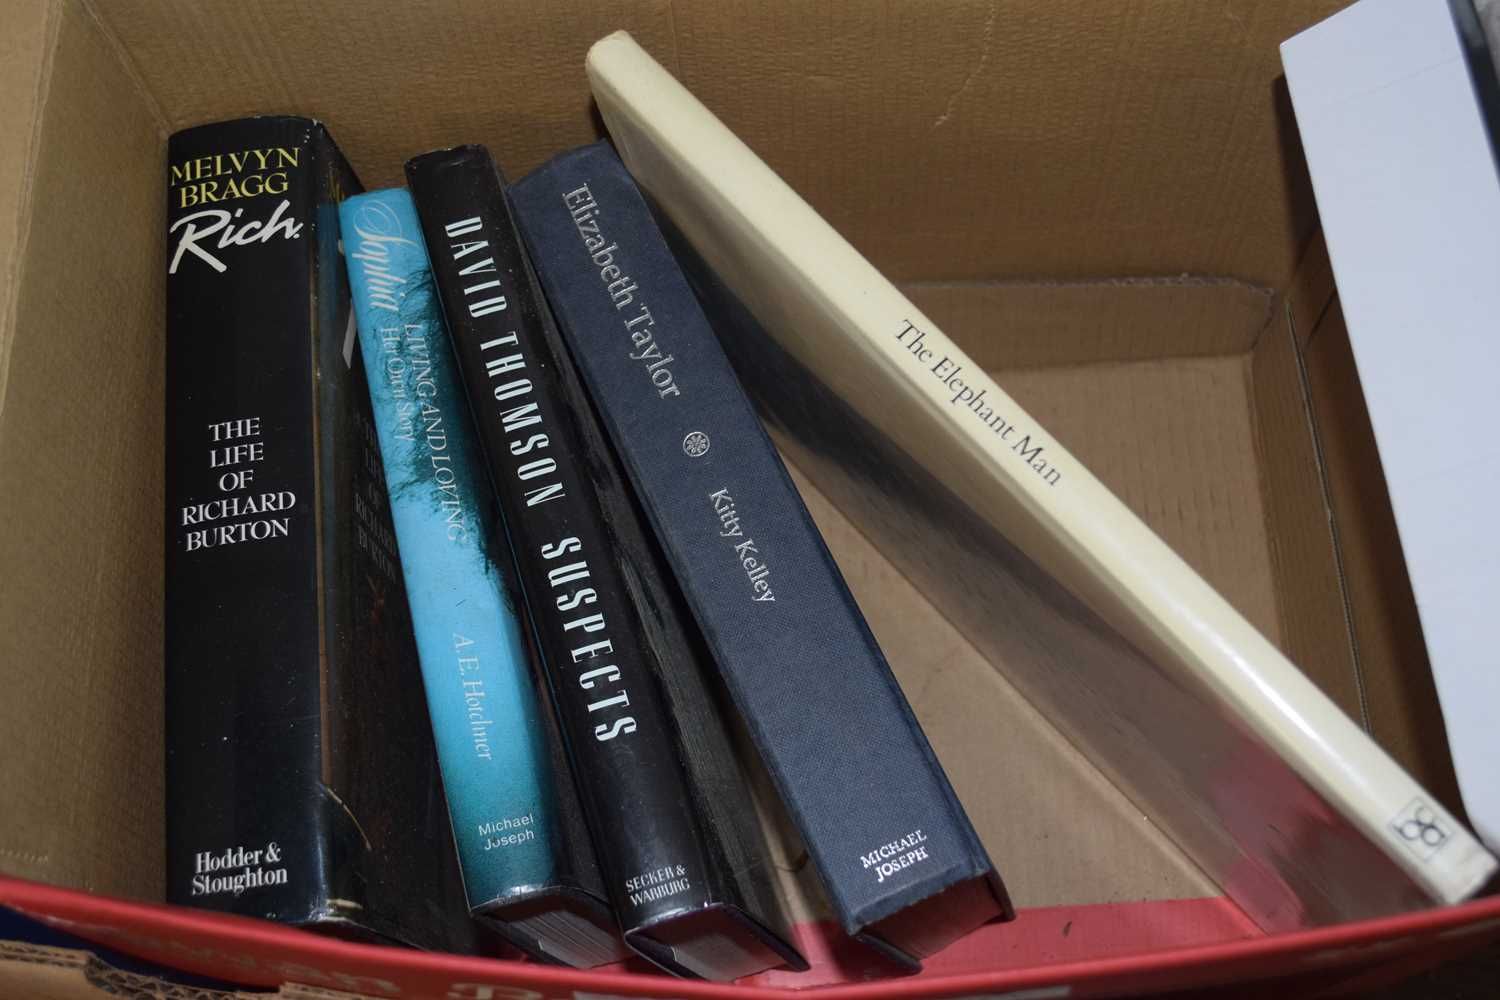 Timed sale of Boxed Books